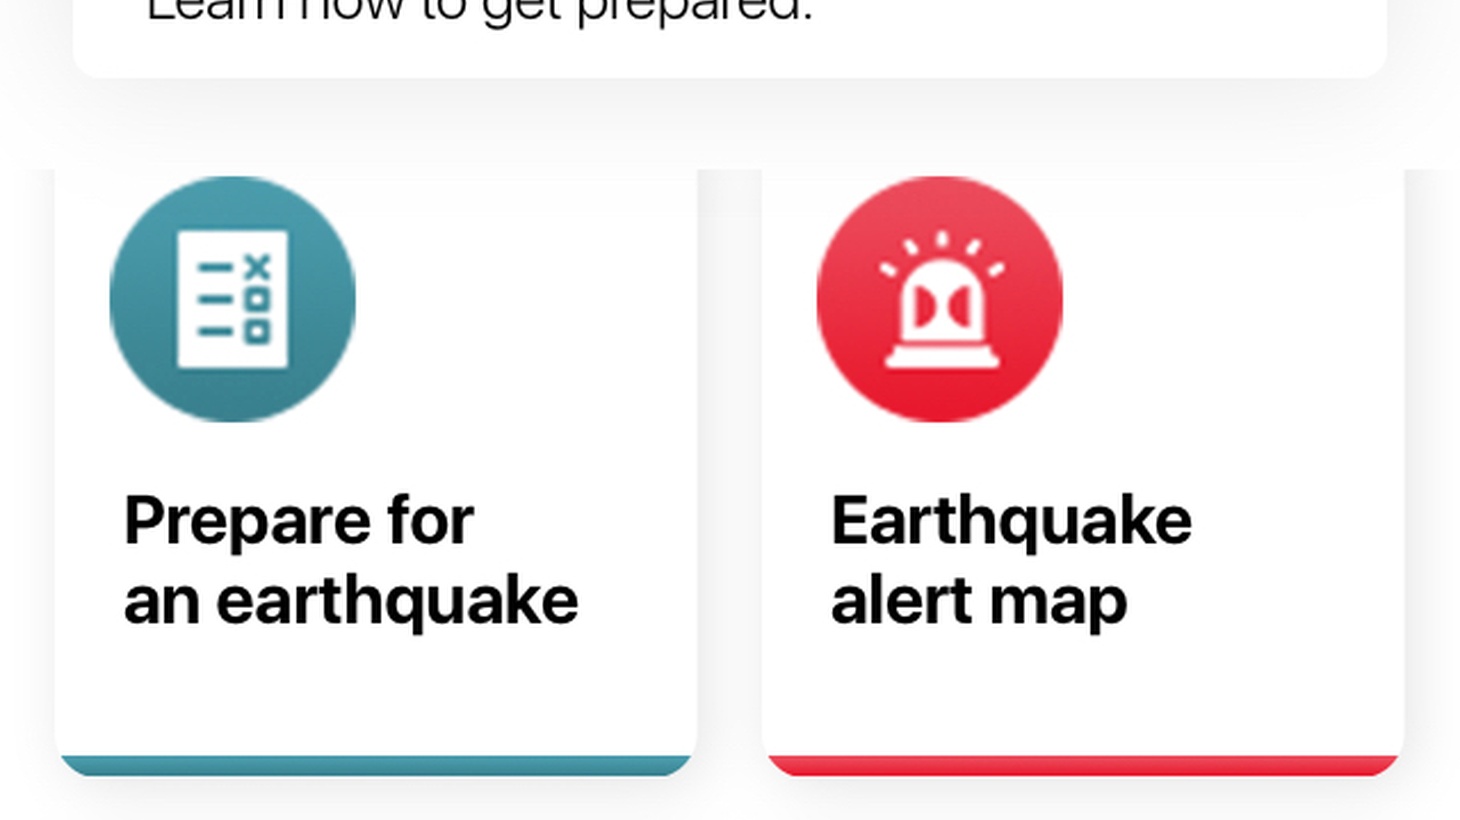 Mayor Eric Garcetti Officially Introduces County’s New Early Warning Quake App